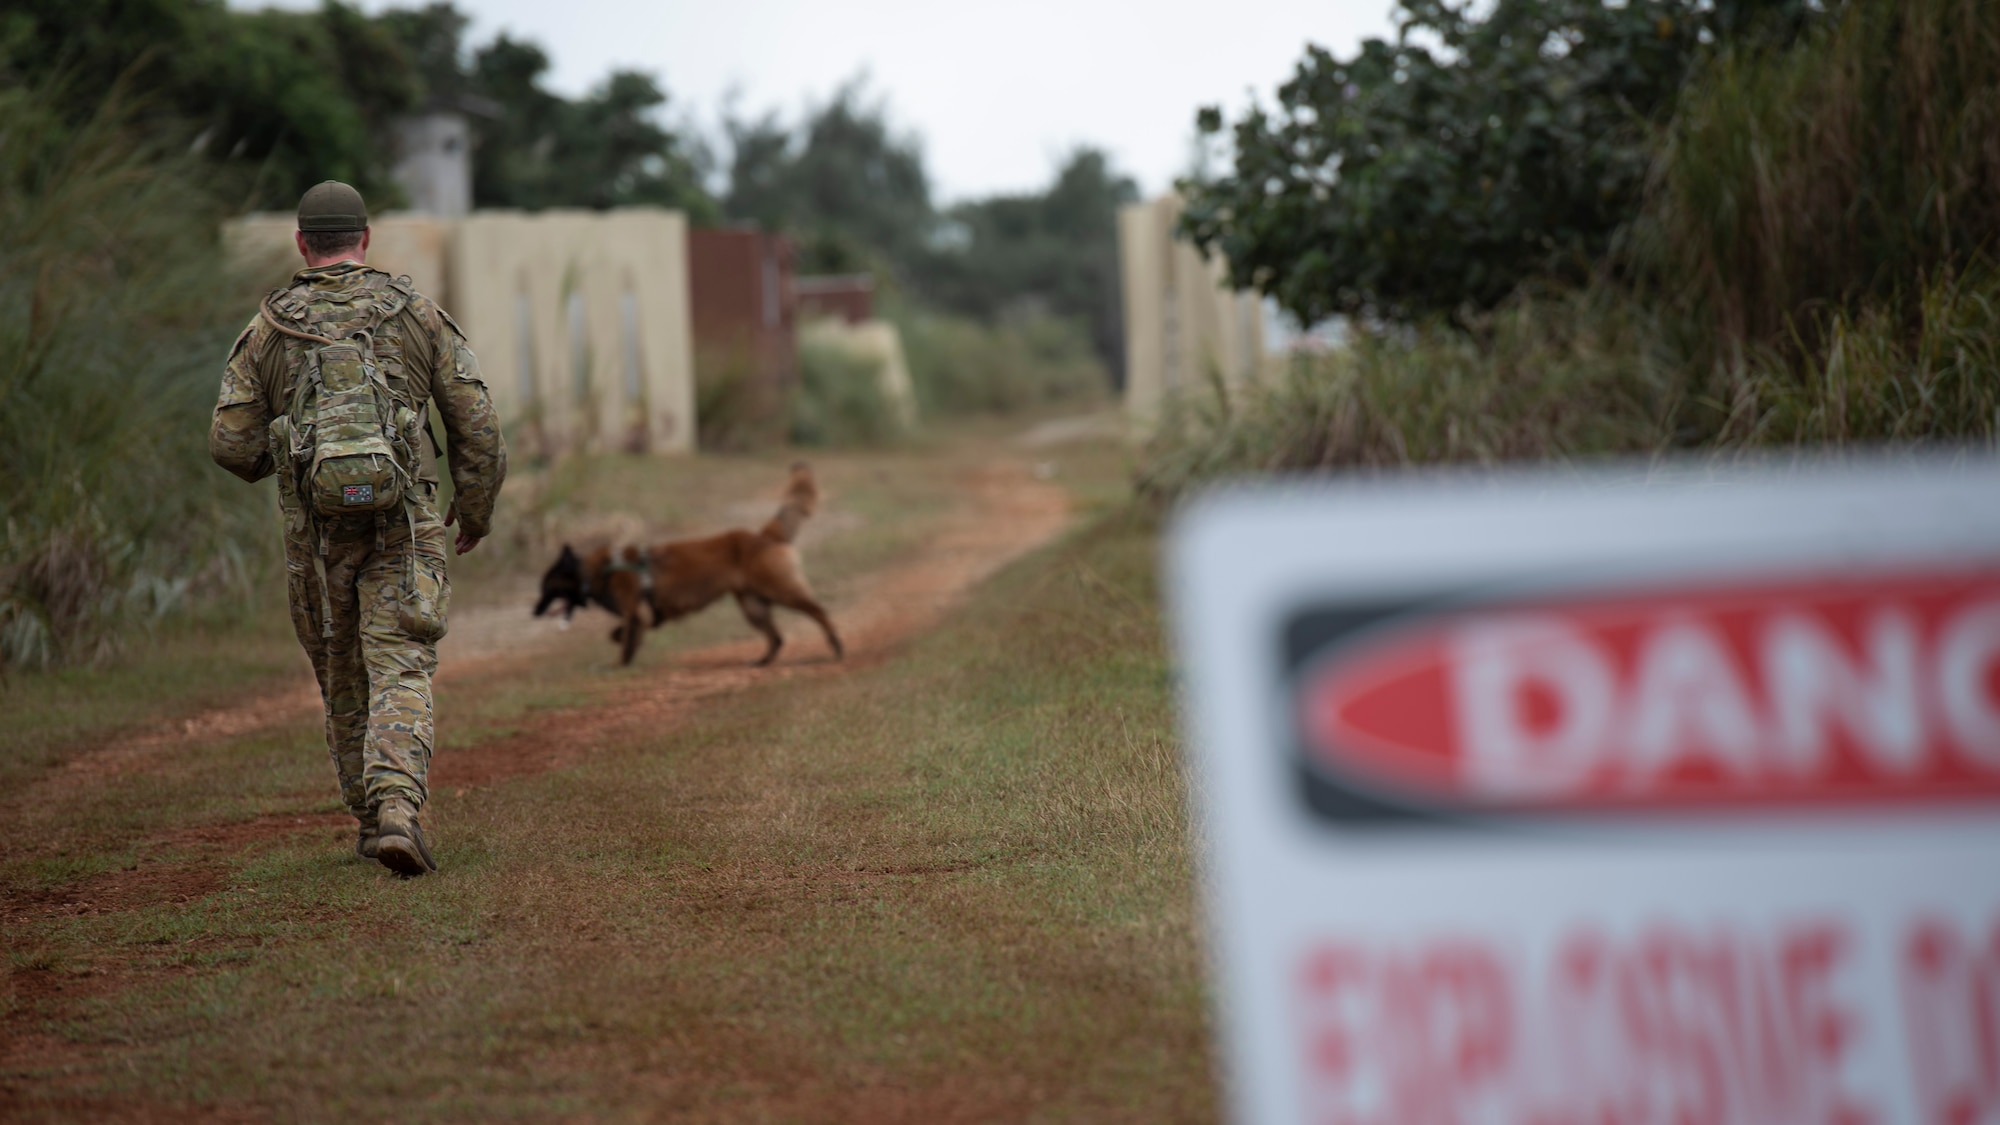 LAC Gregory Chance, 2 Security Forces Squadron Royal Australian Air Force Base Amberley, military working dog handler, works with his dog, Java, on a mission to find explosives during Pacific Defender 21-1 at Andersen Air Force Base, Guam, January 27 2021.